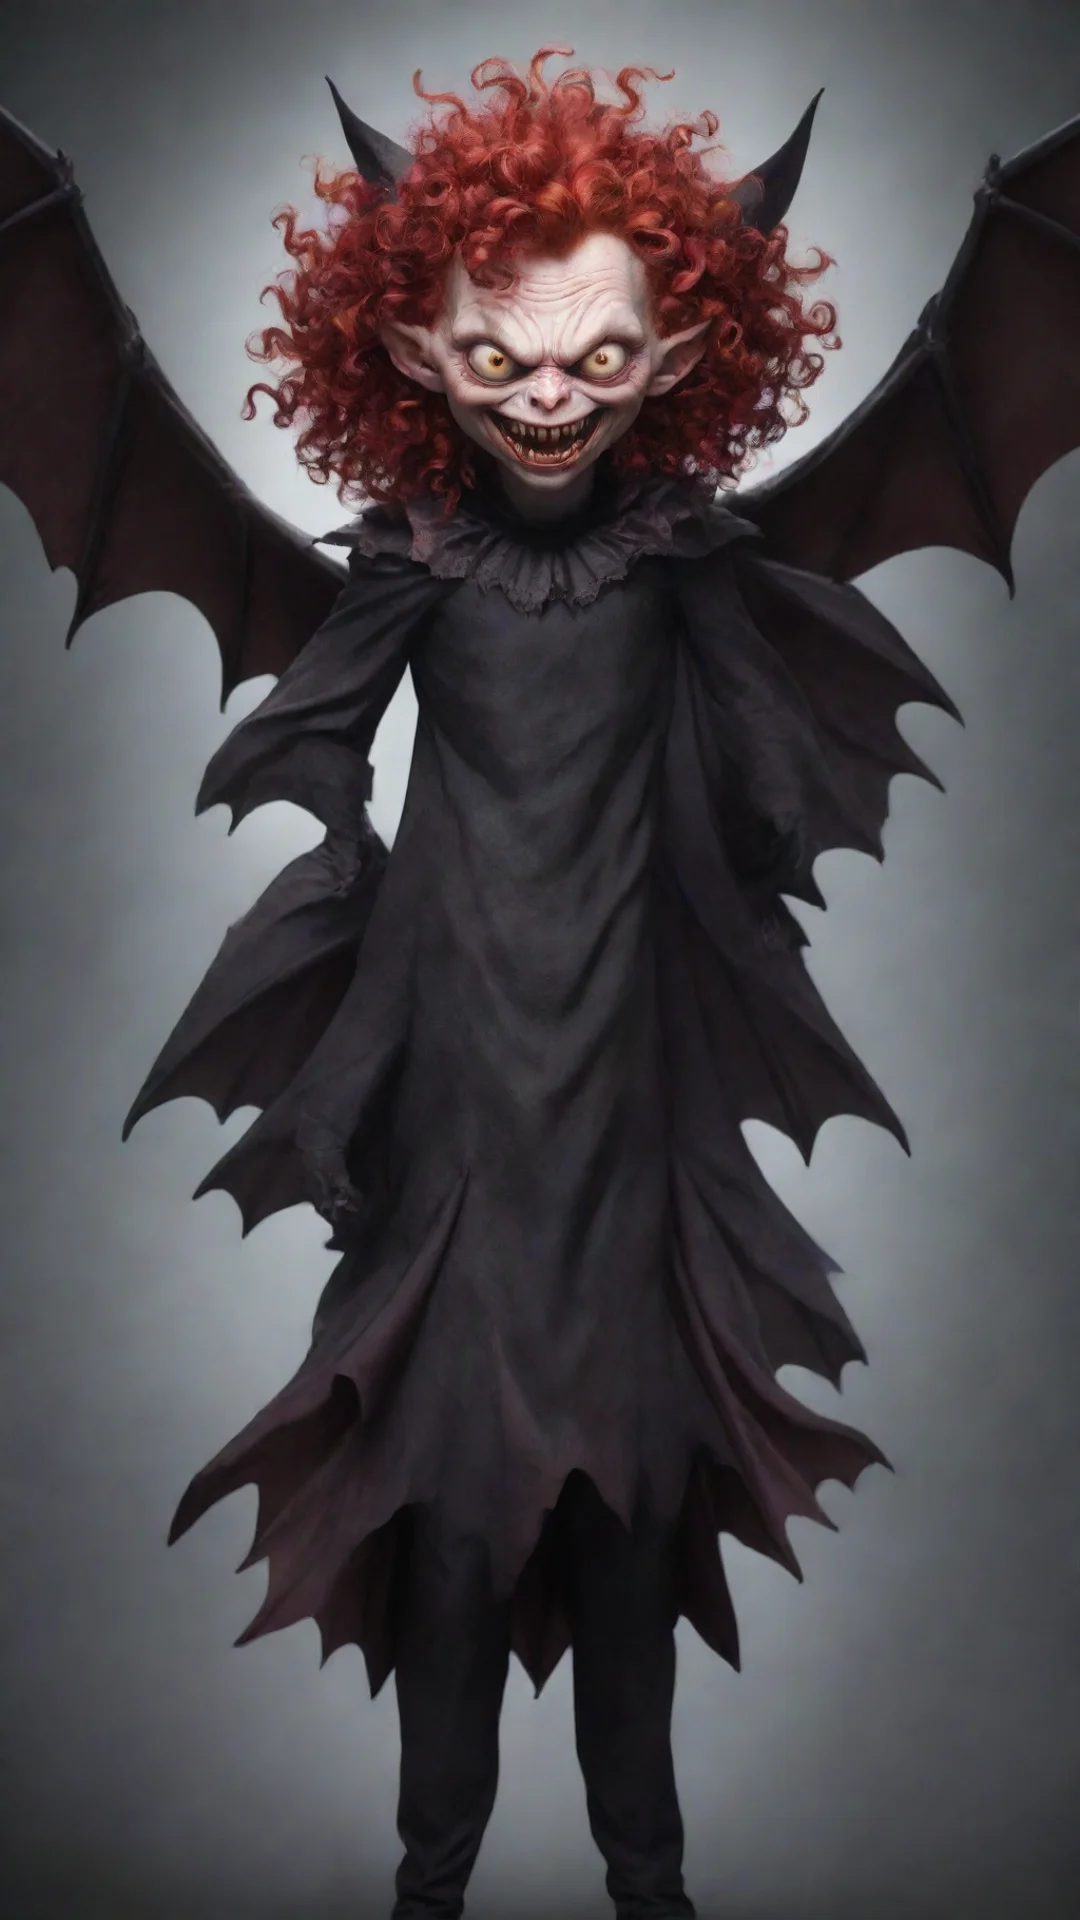 amazing a bat demon with red curly hair. awesome portrait 2 tall